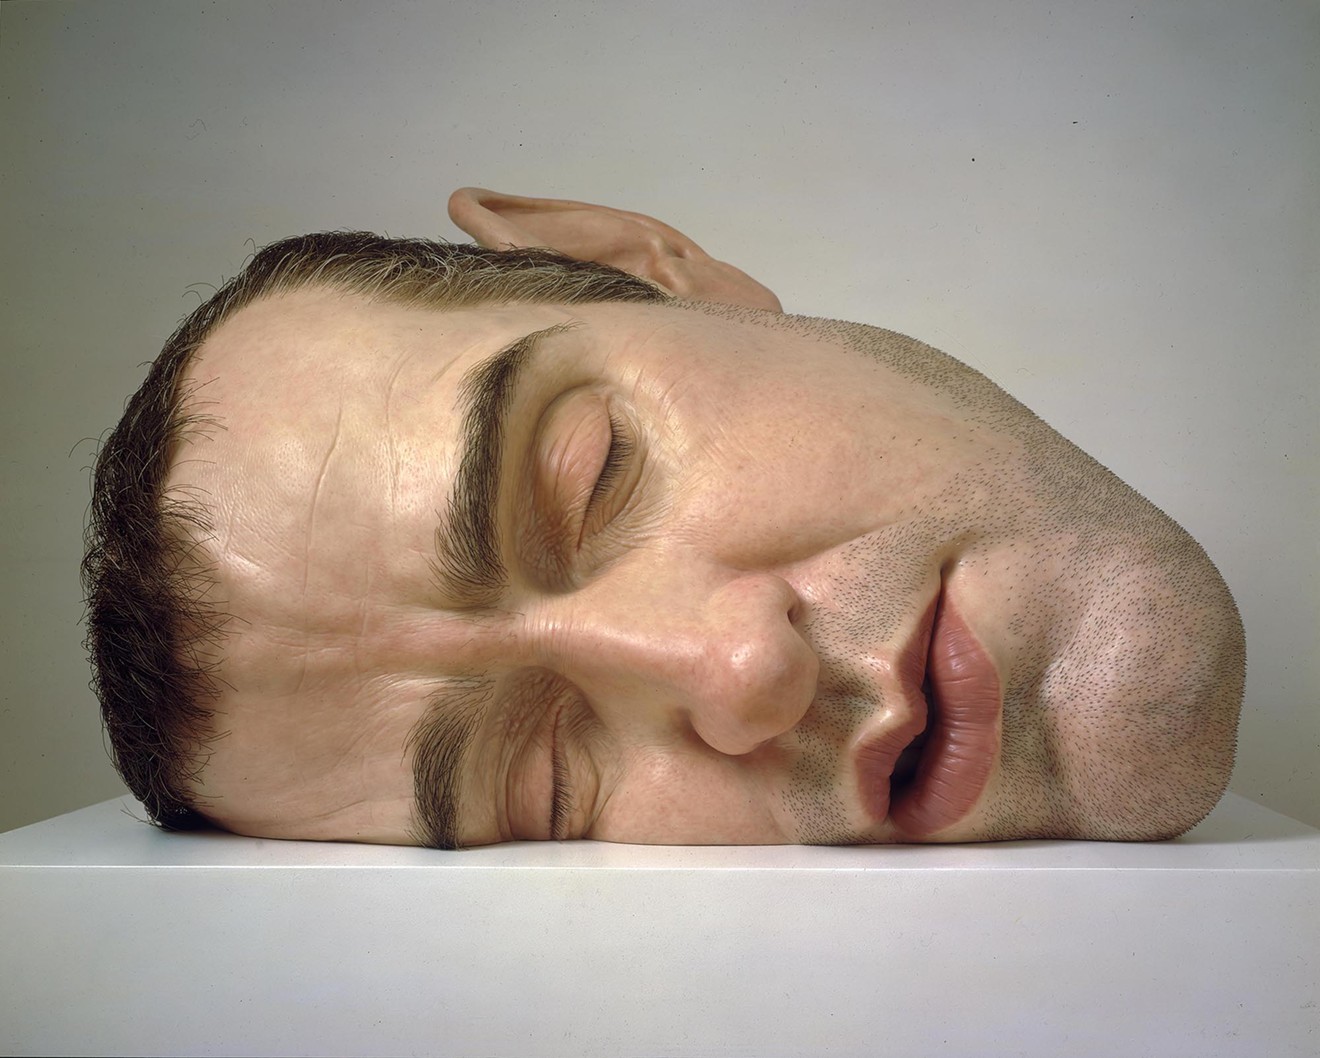 Mask II, a self-portrait by Ron Mueck, will be on view at the Museum of Fine Arts, Houston, February 26-August 13.